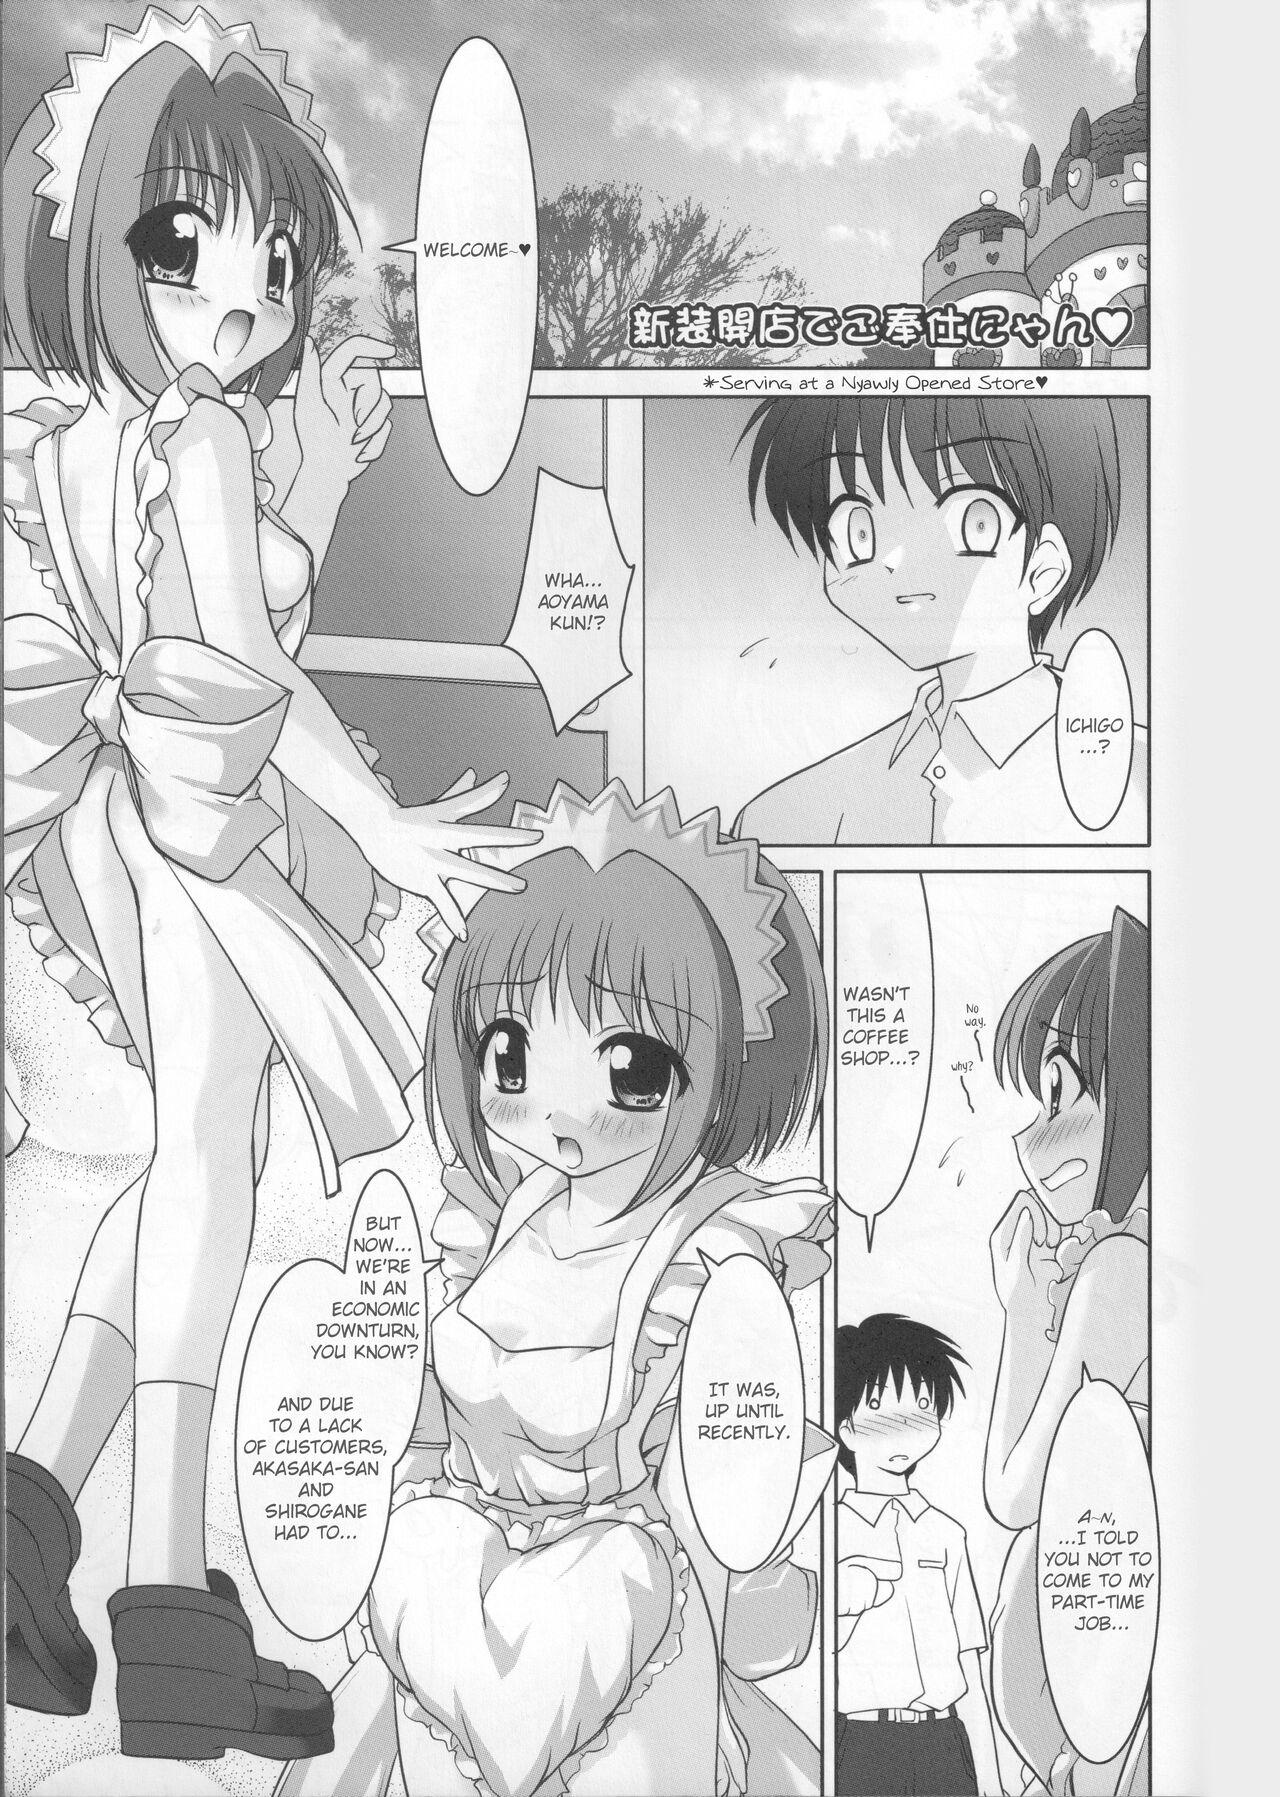 Neighbor Ring My Bell - MAGICALDELTA.COM - Tokyo mew mew | mew mew power Secret - Page 4